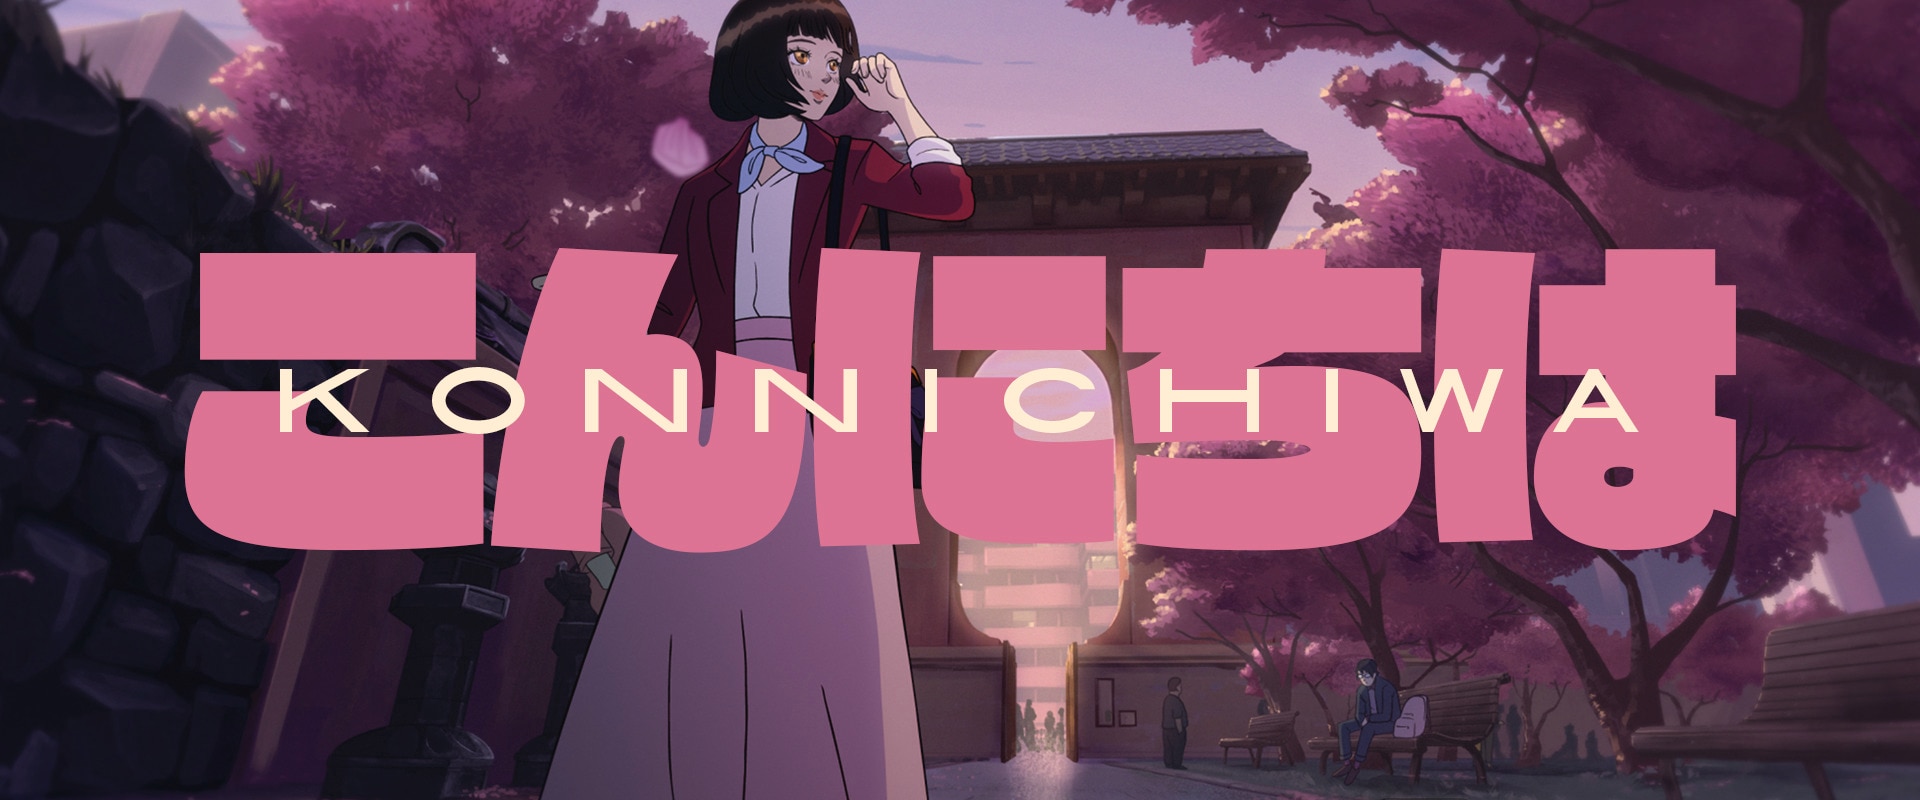 Story Konnichiwa created by Anime artists together with Magnum about the deep and meaningful pleasure that comes from being true to who you are.